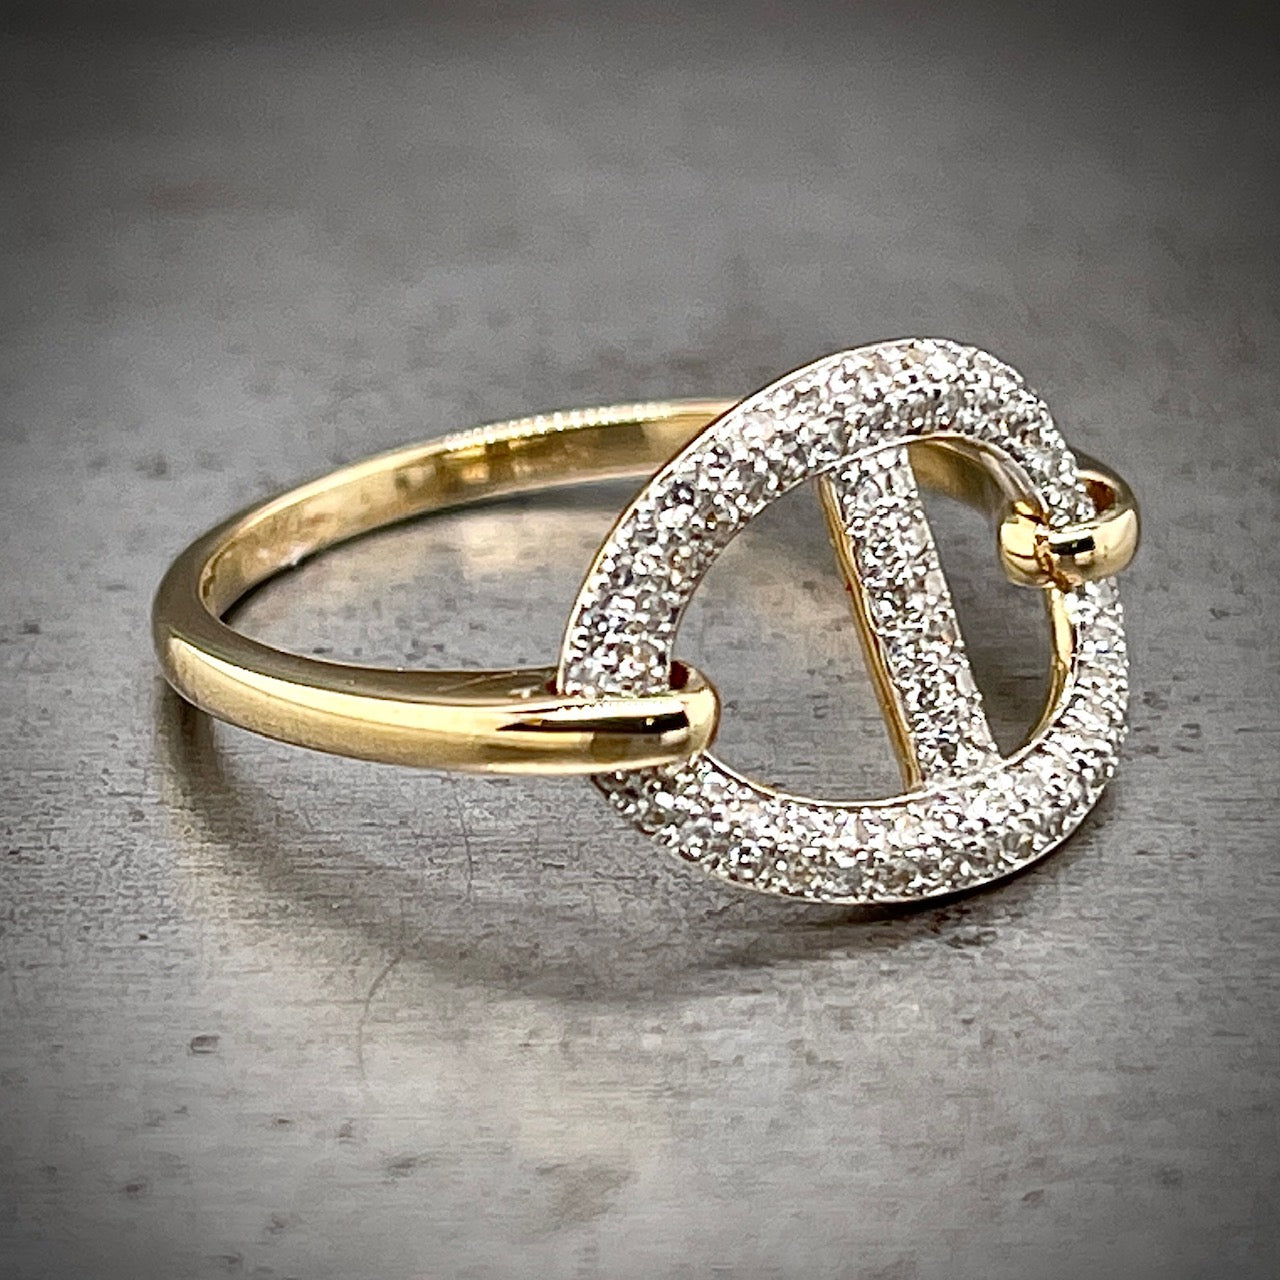 Angled View of 14k Yellow and White Gold Two-tone Diamond Ring